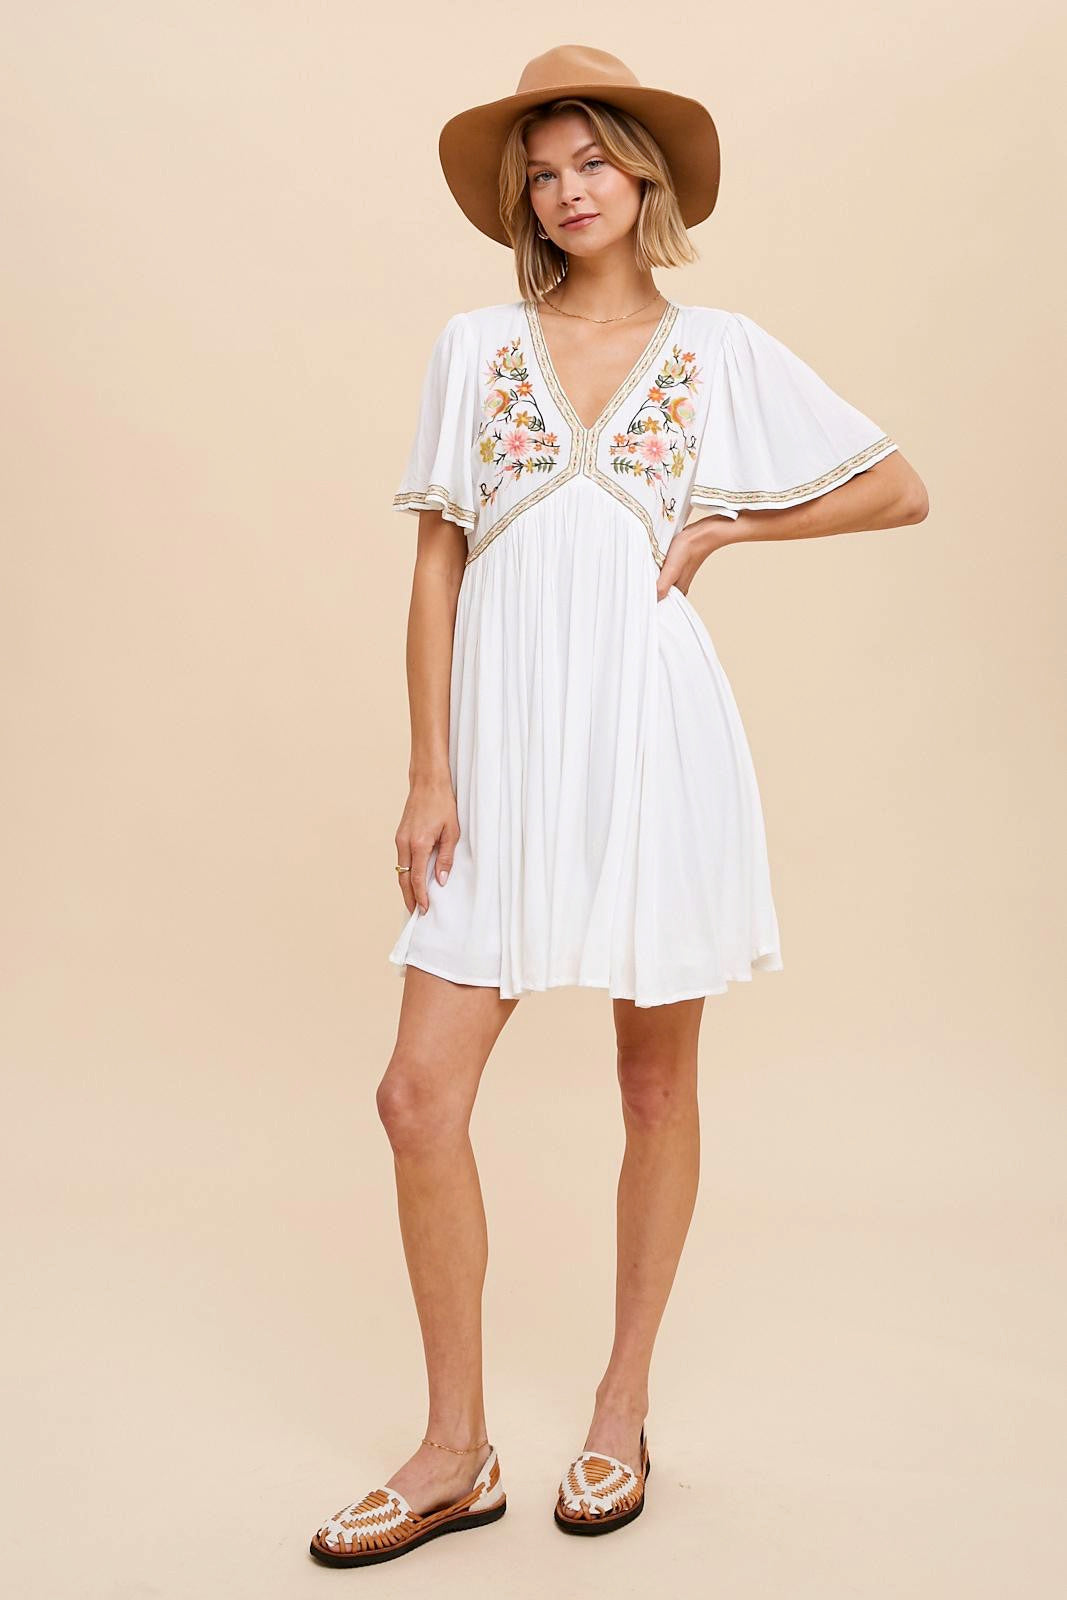 Lilly embroidered floral white mini dress